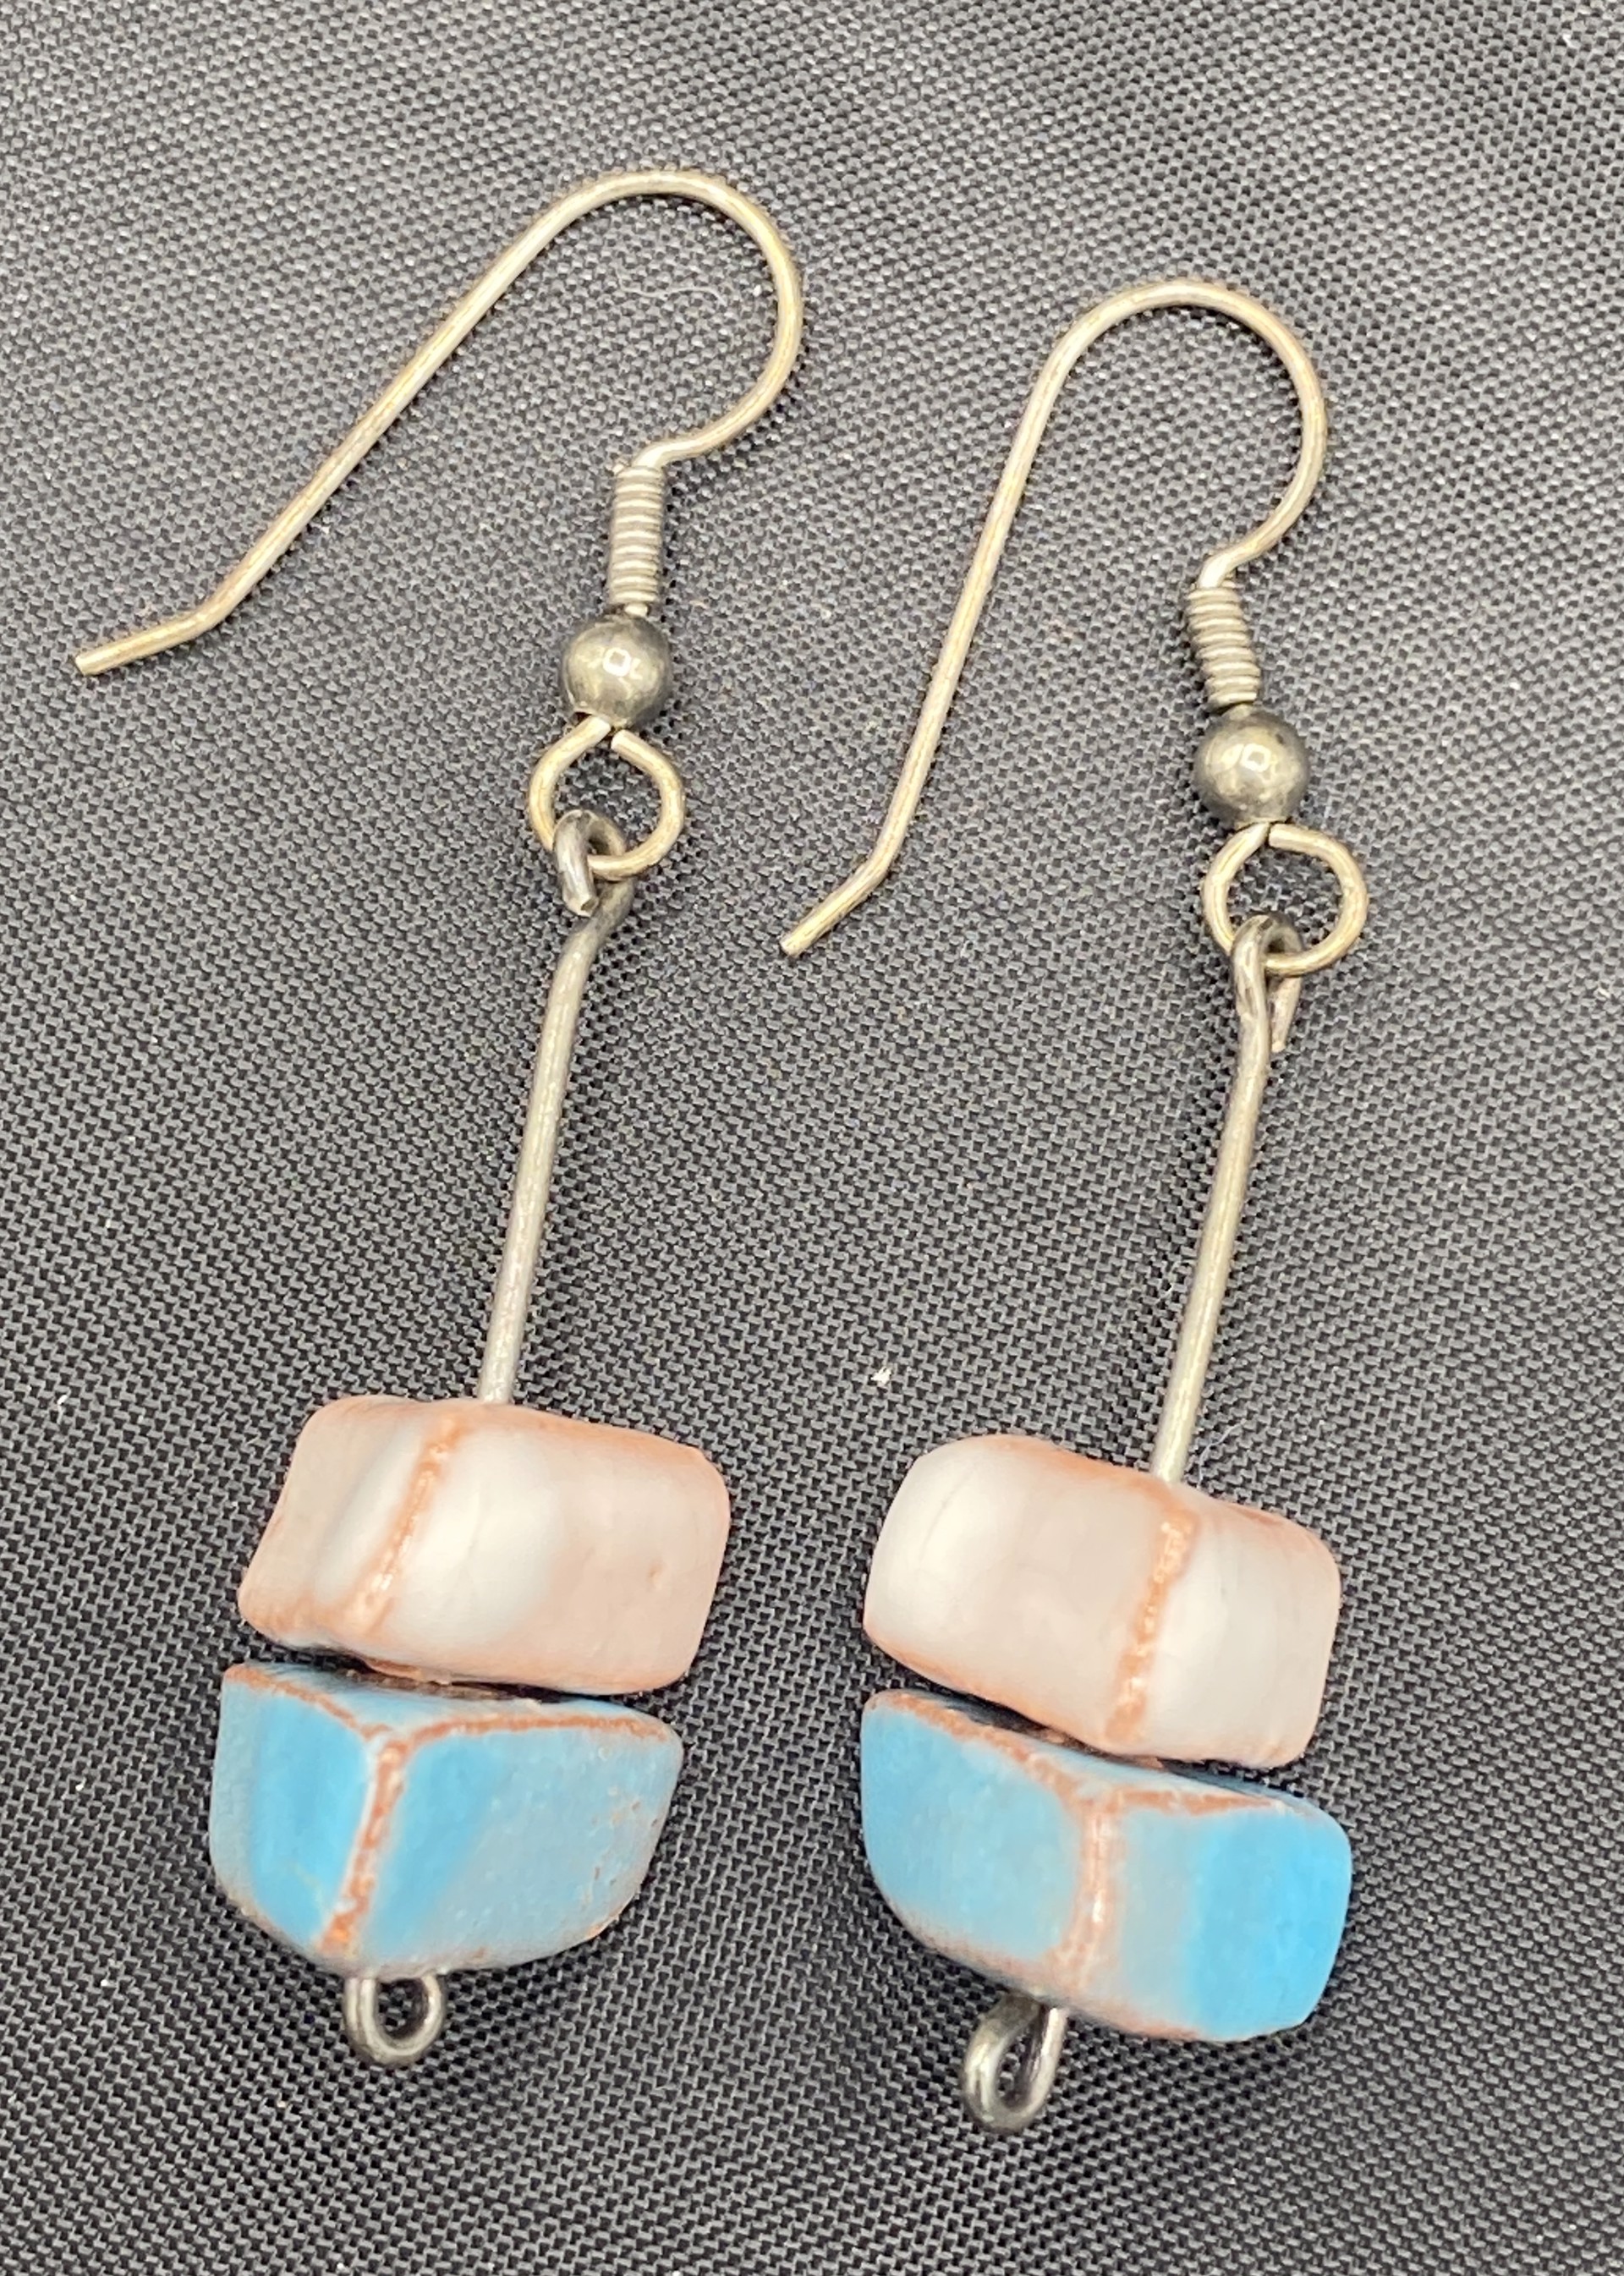 1.75" Turquoise & White Triangle bead earrings by Stella Sullivan